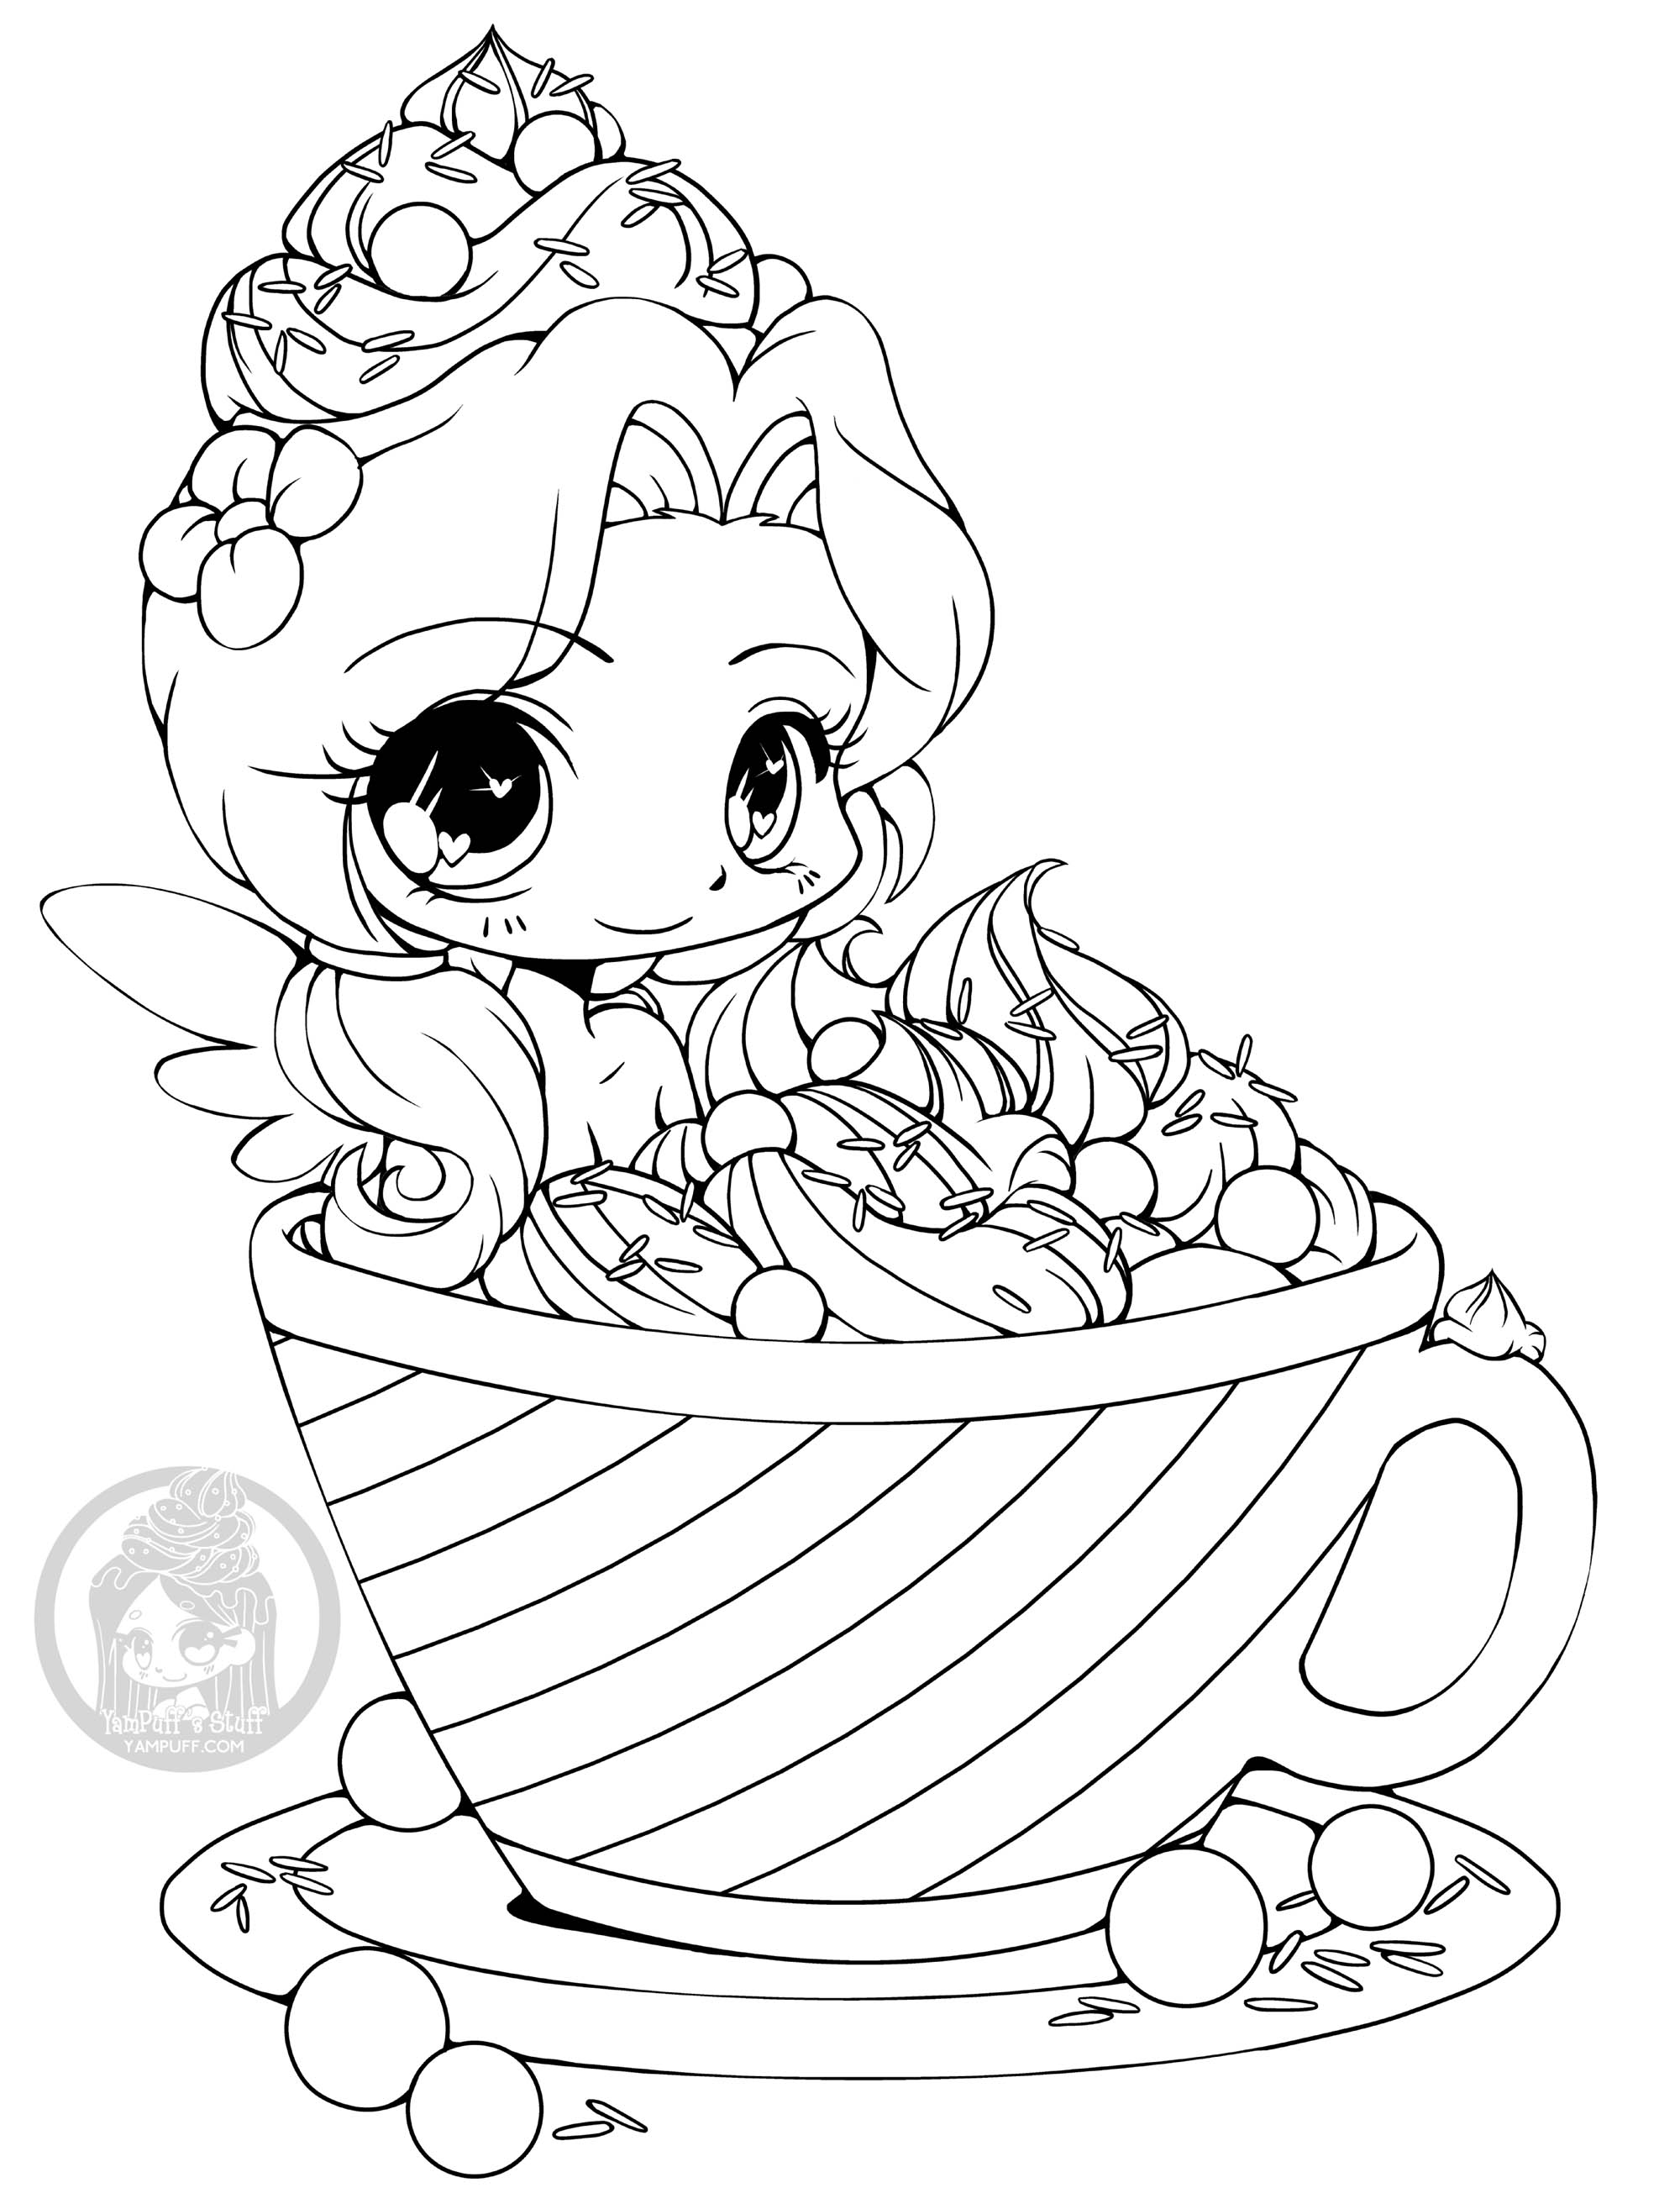 Hot cocoa - Return to childhood Adult Coloring Pages